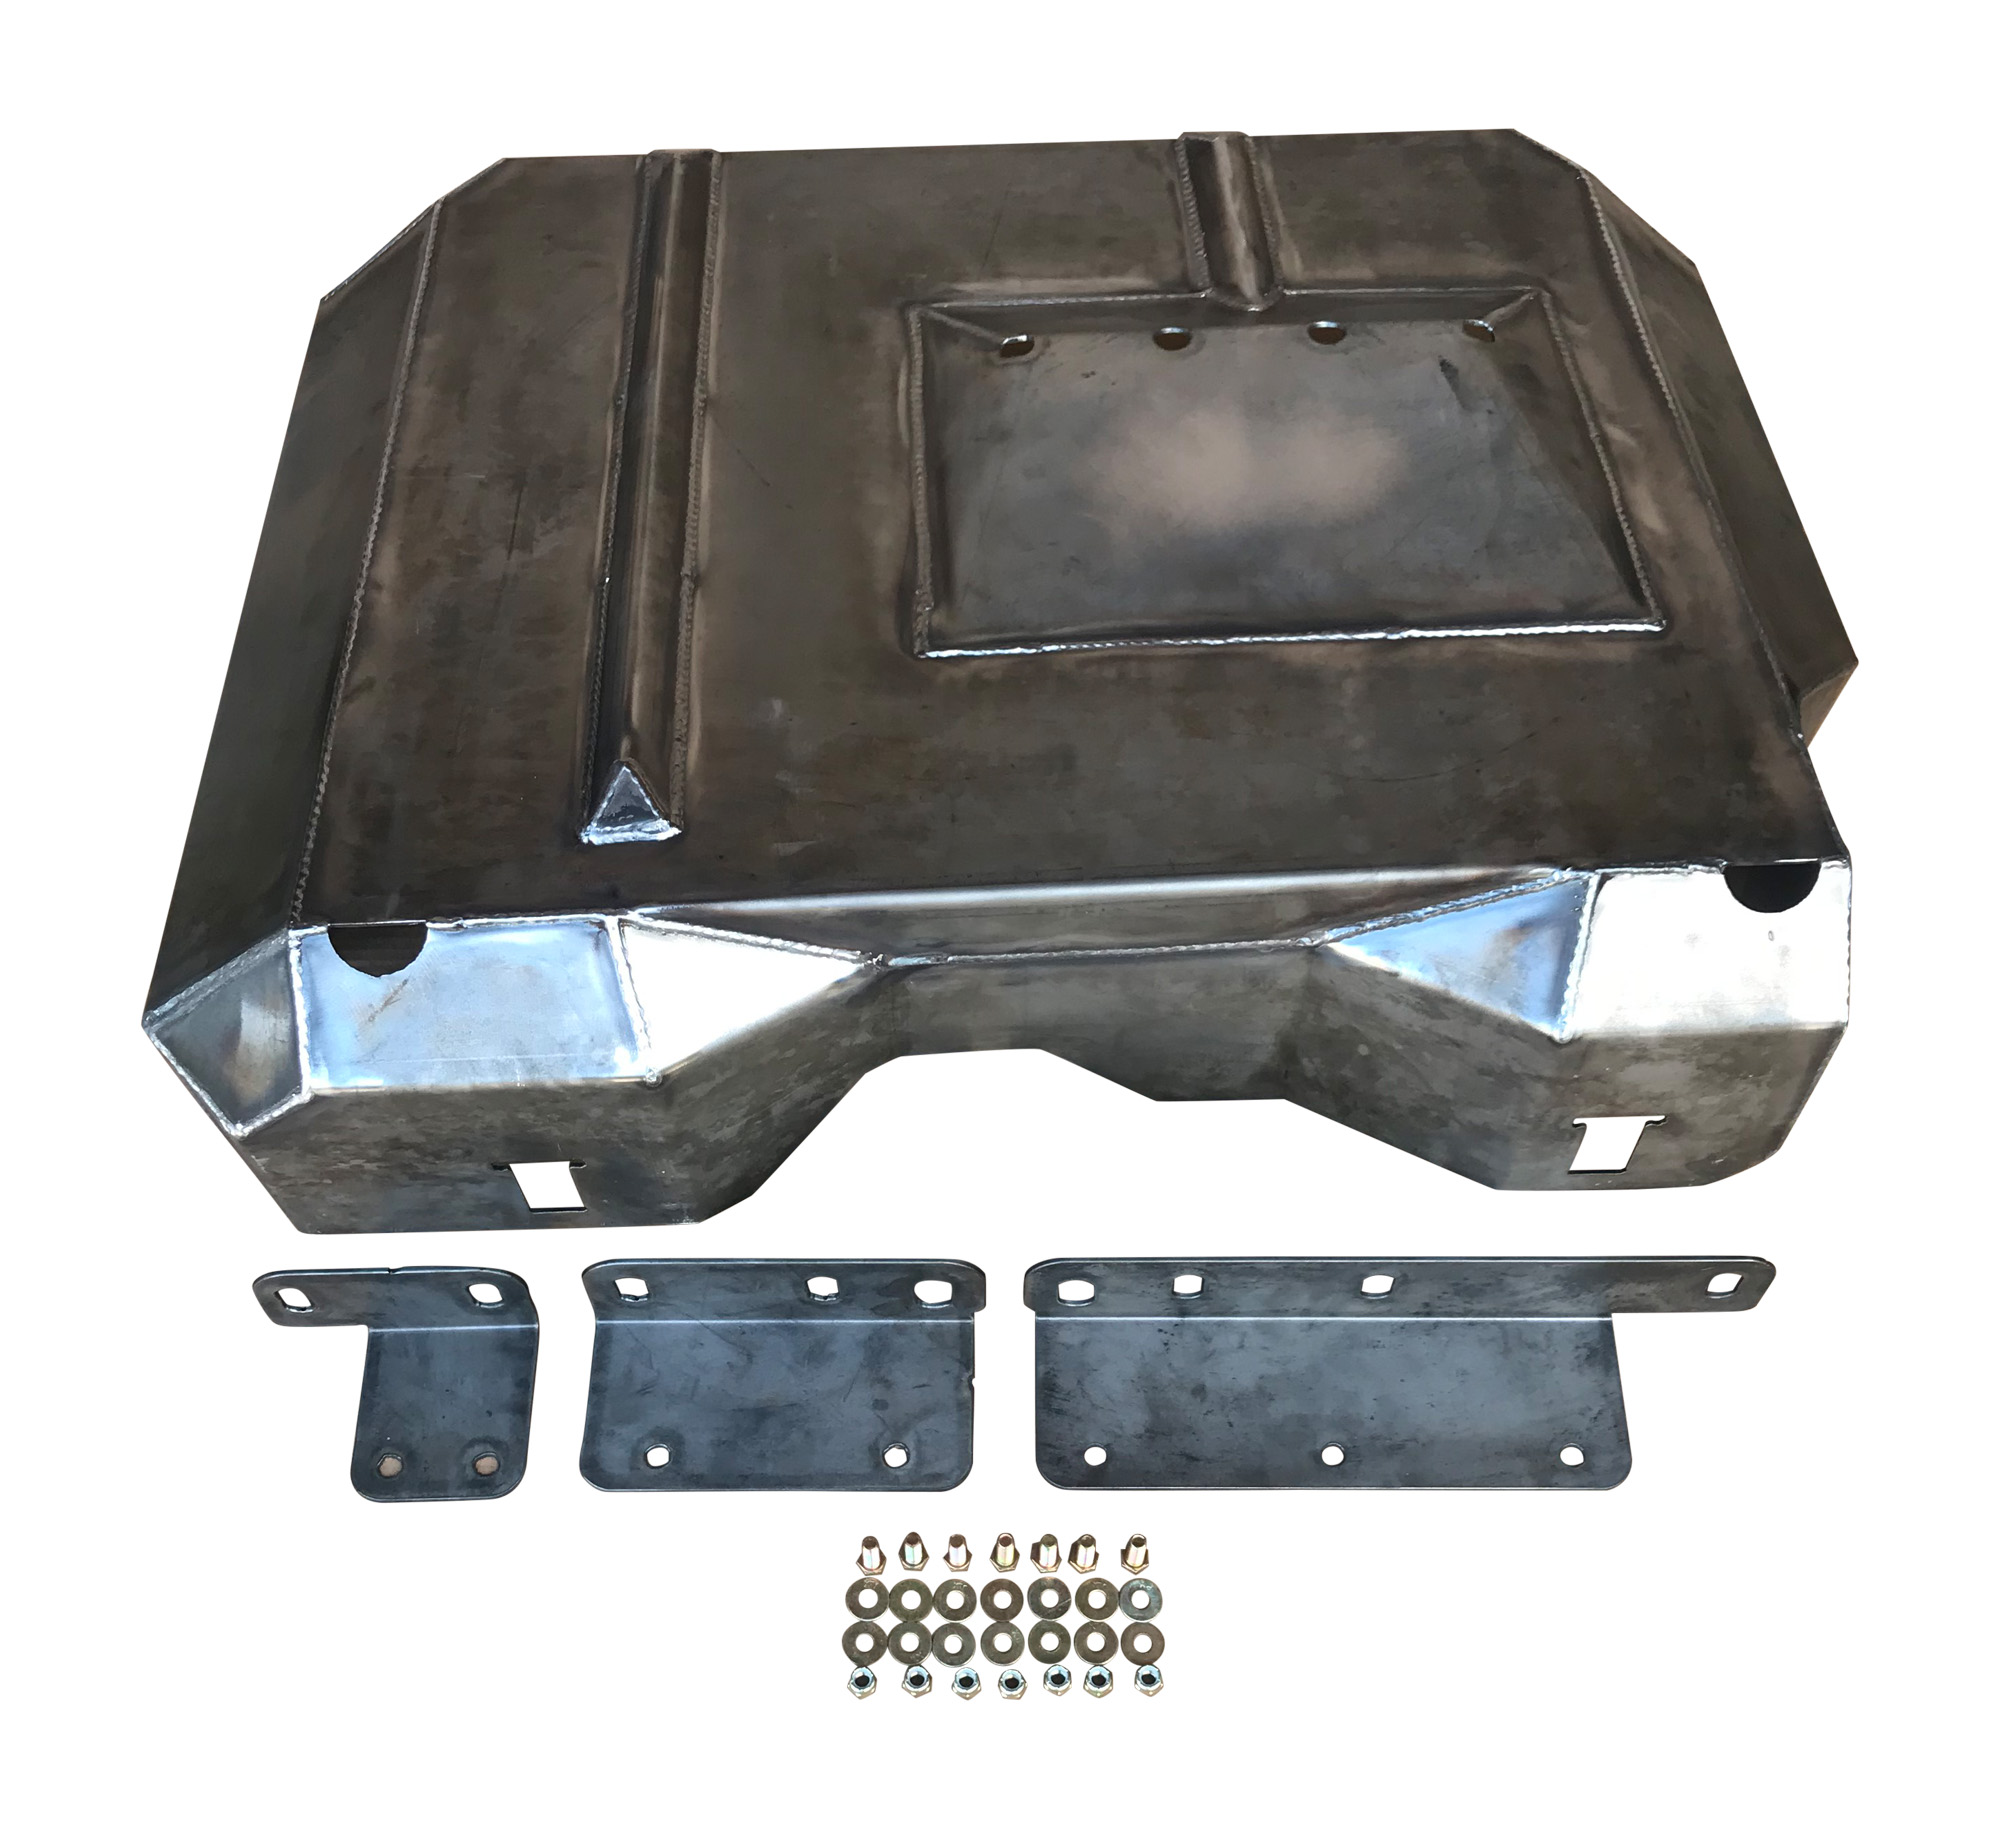 1999 - 2004 jeep grand cherokee gas tank cover skid plate